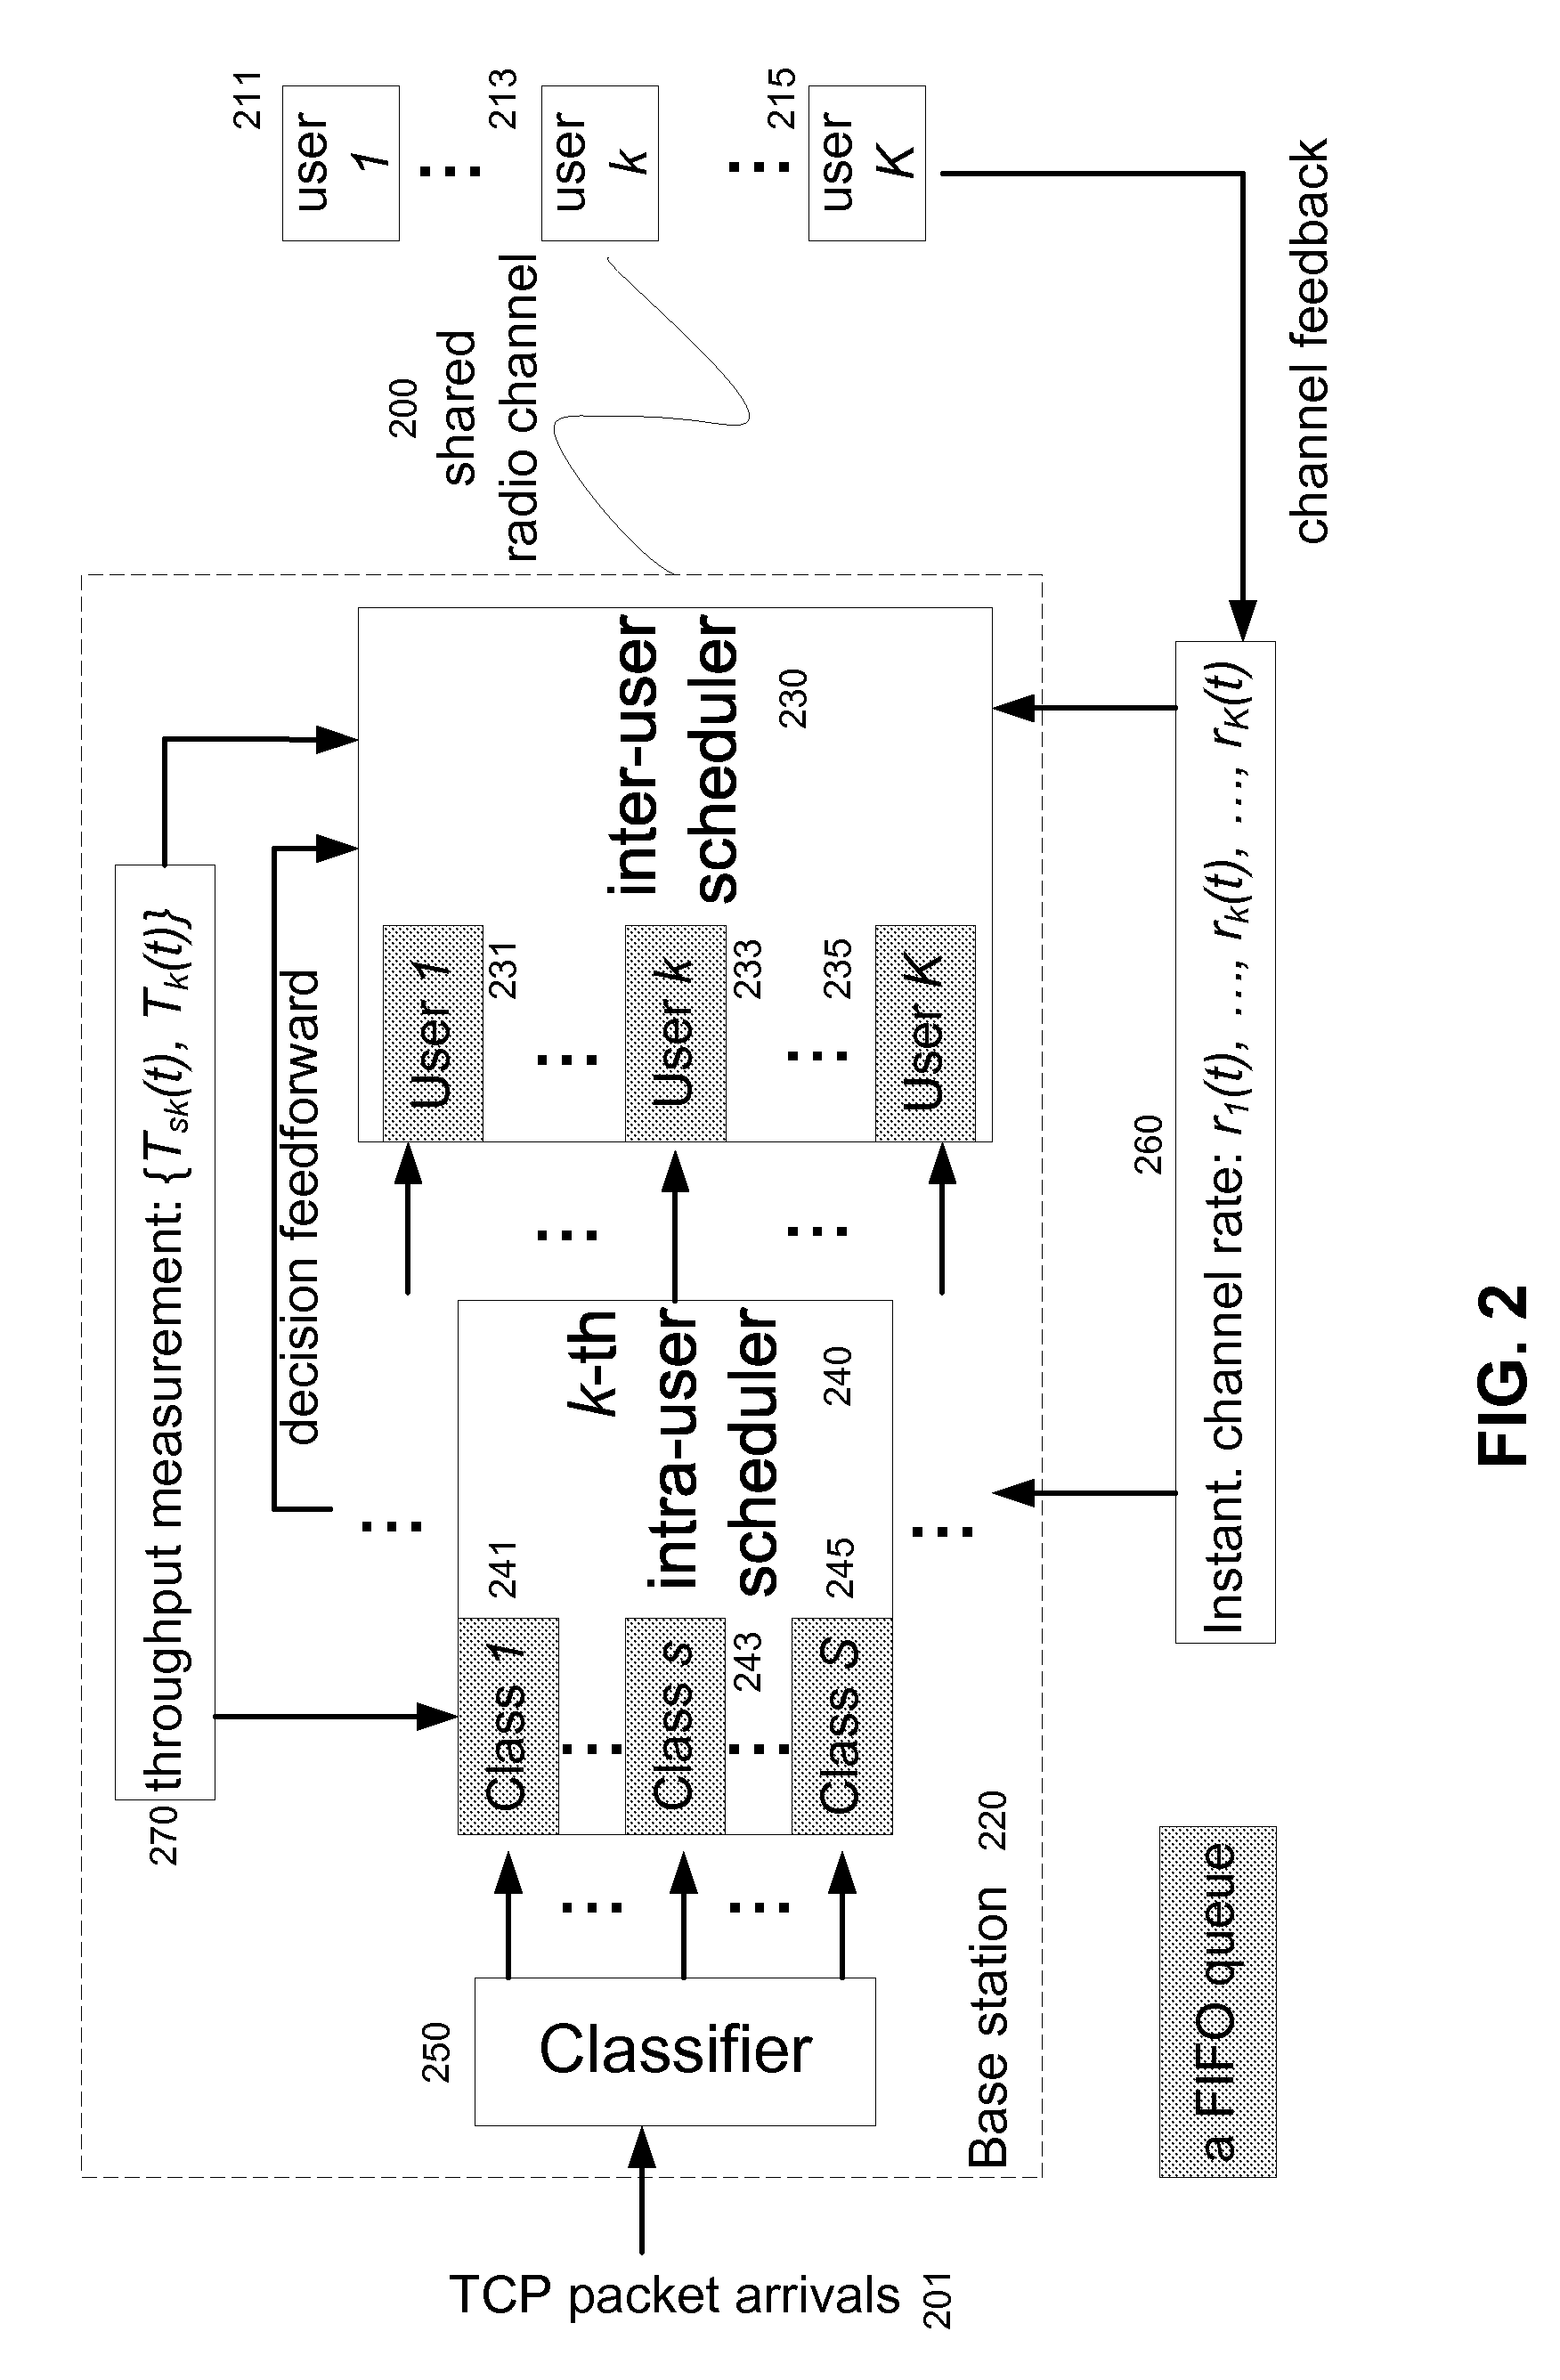 Service Differentiated Downlink Scheduling in Wireless Packet Data Systems